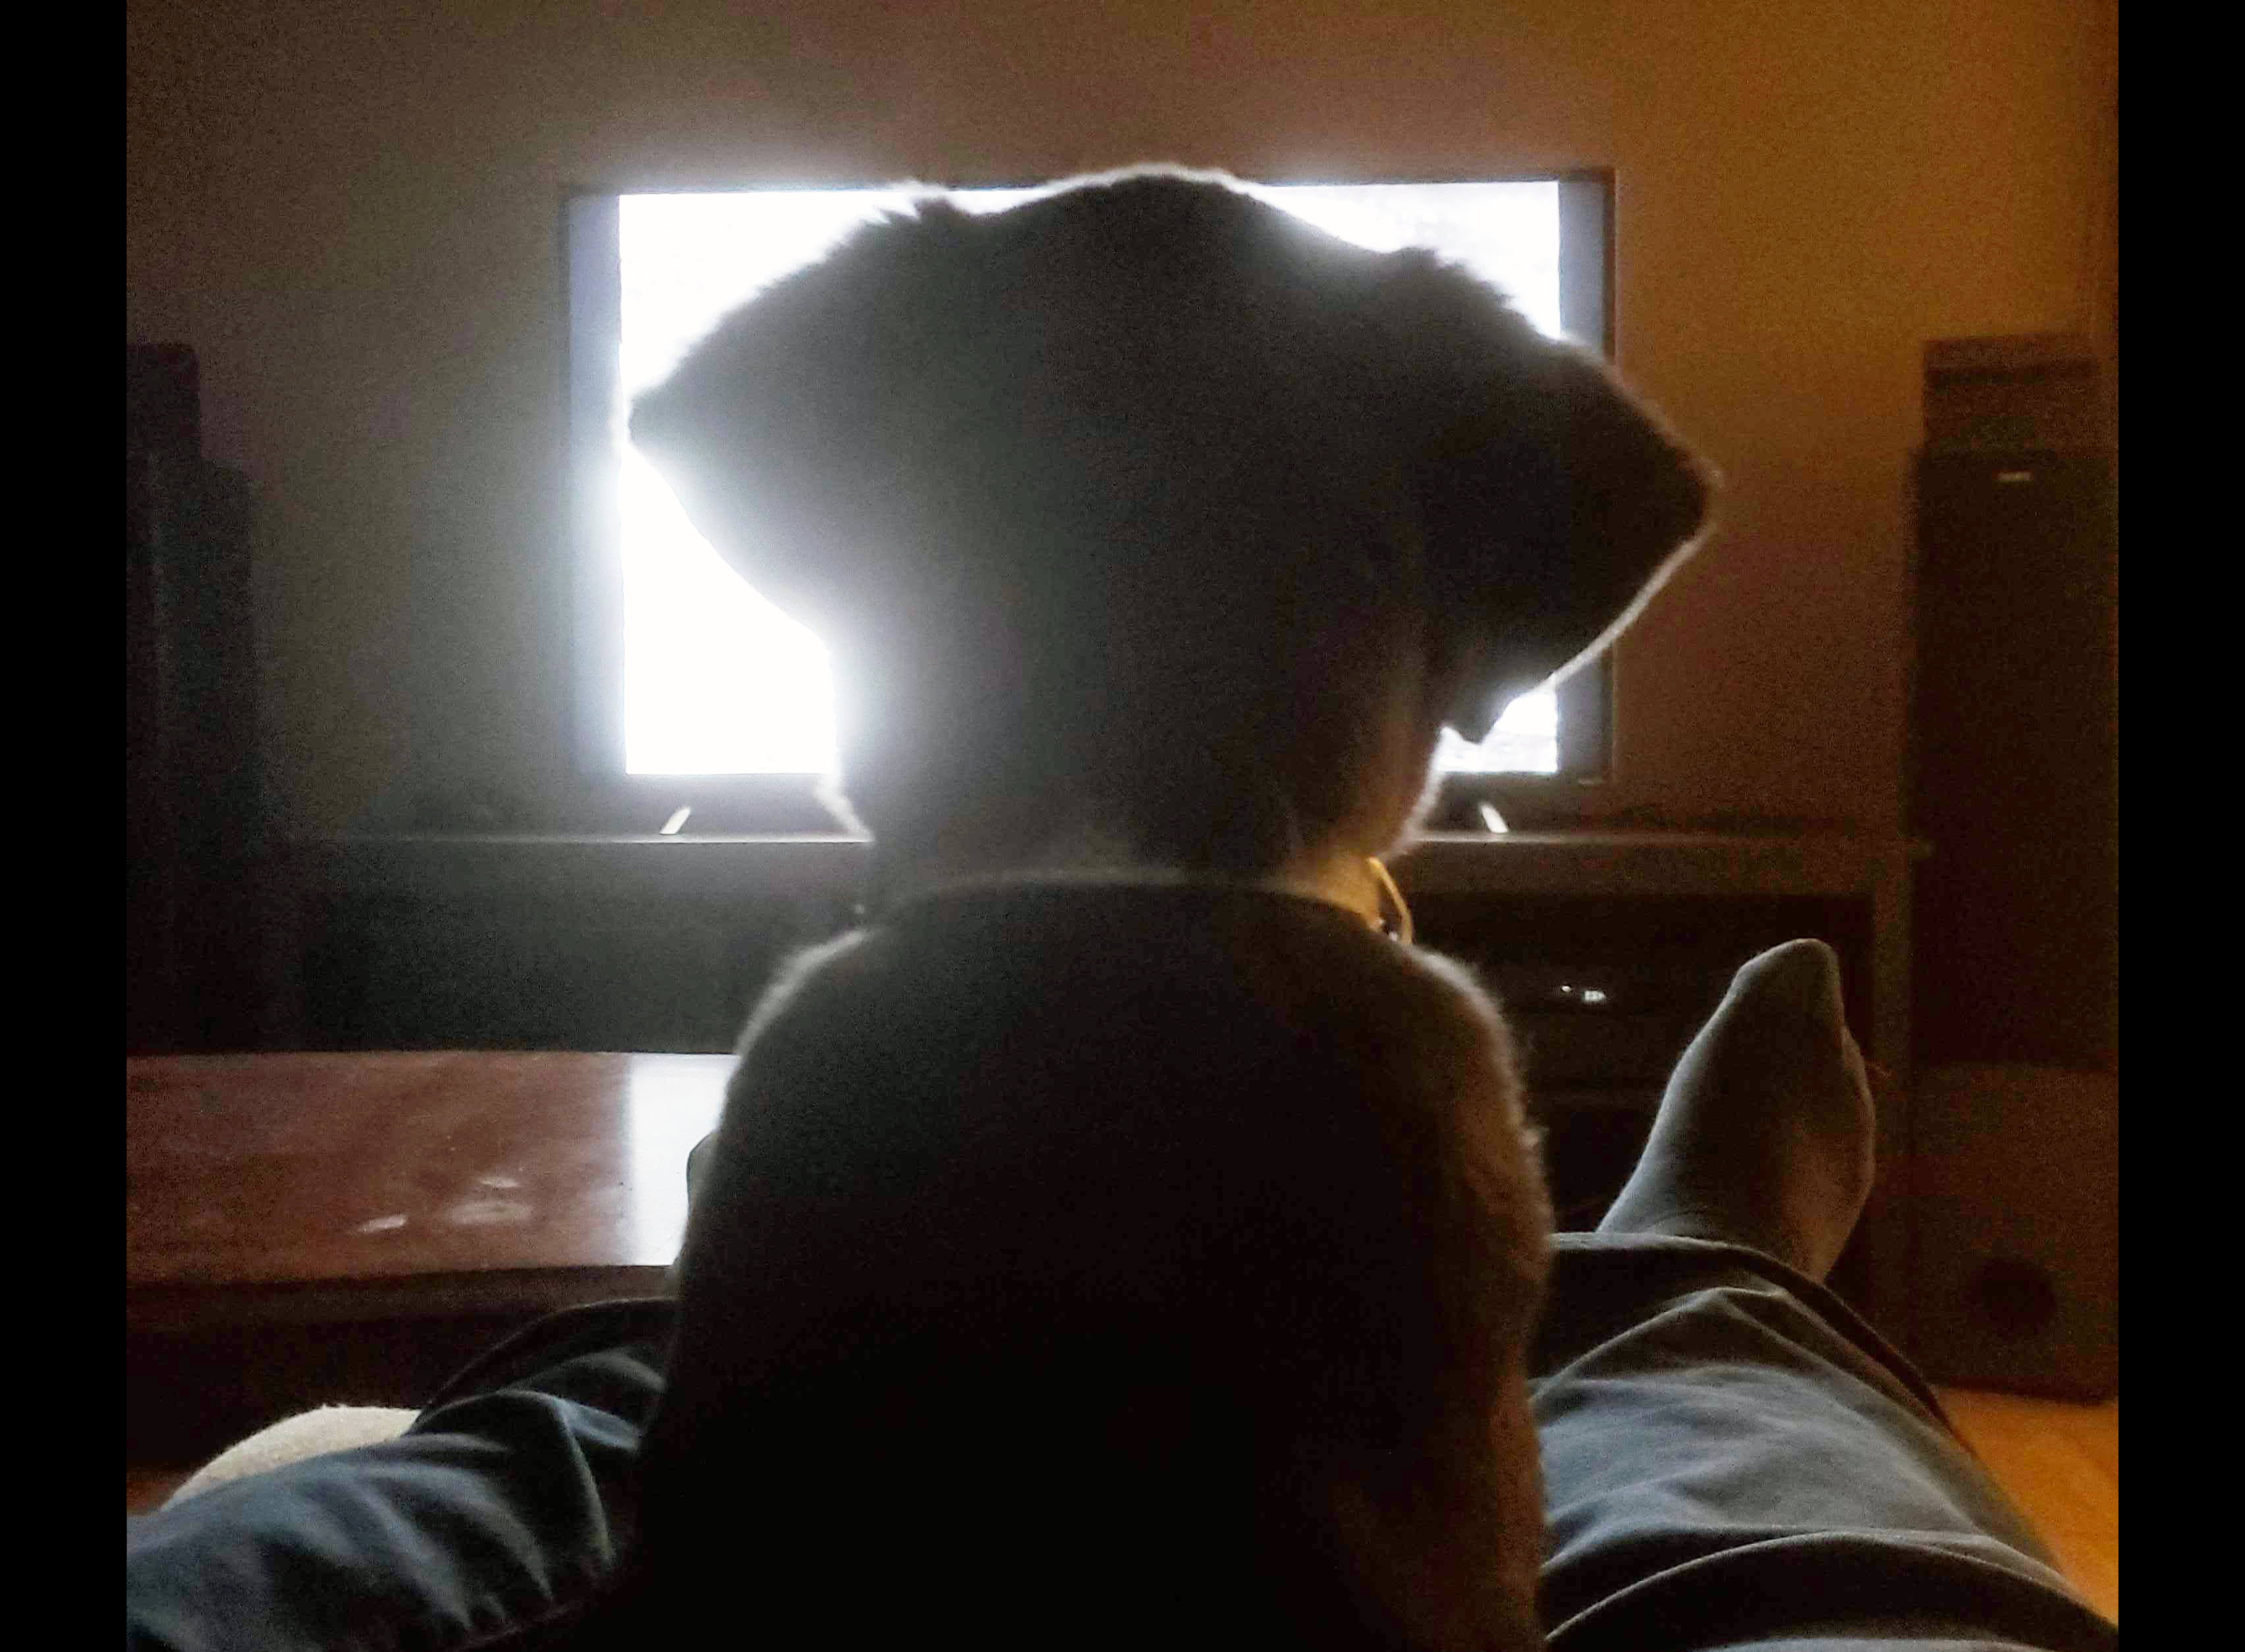 Ace the dog watches TV on his owner's lap